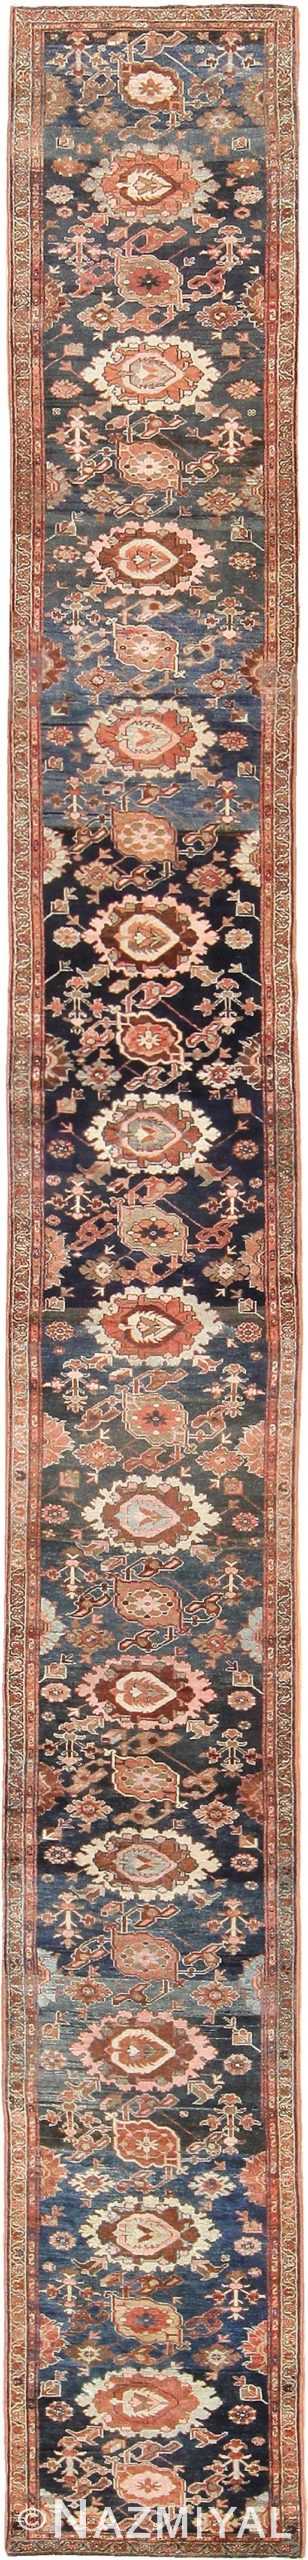 Blue Tribal Antique Persian Malayer Runner 47237 Nazmiyal Antique Rugs